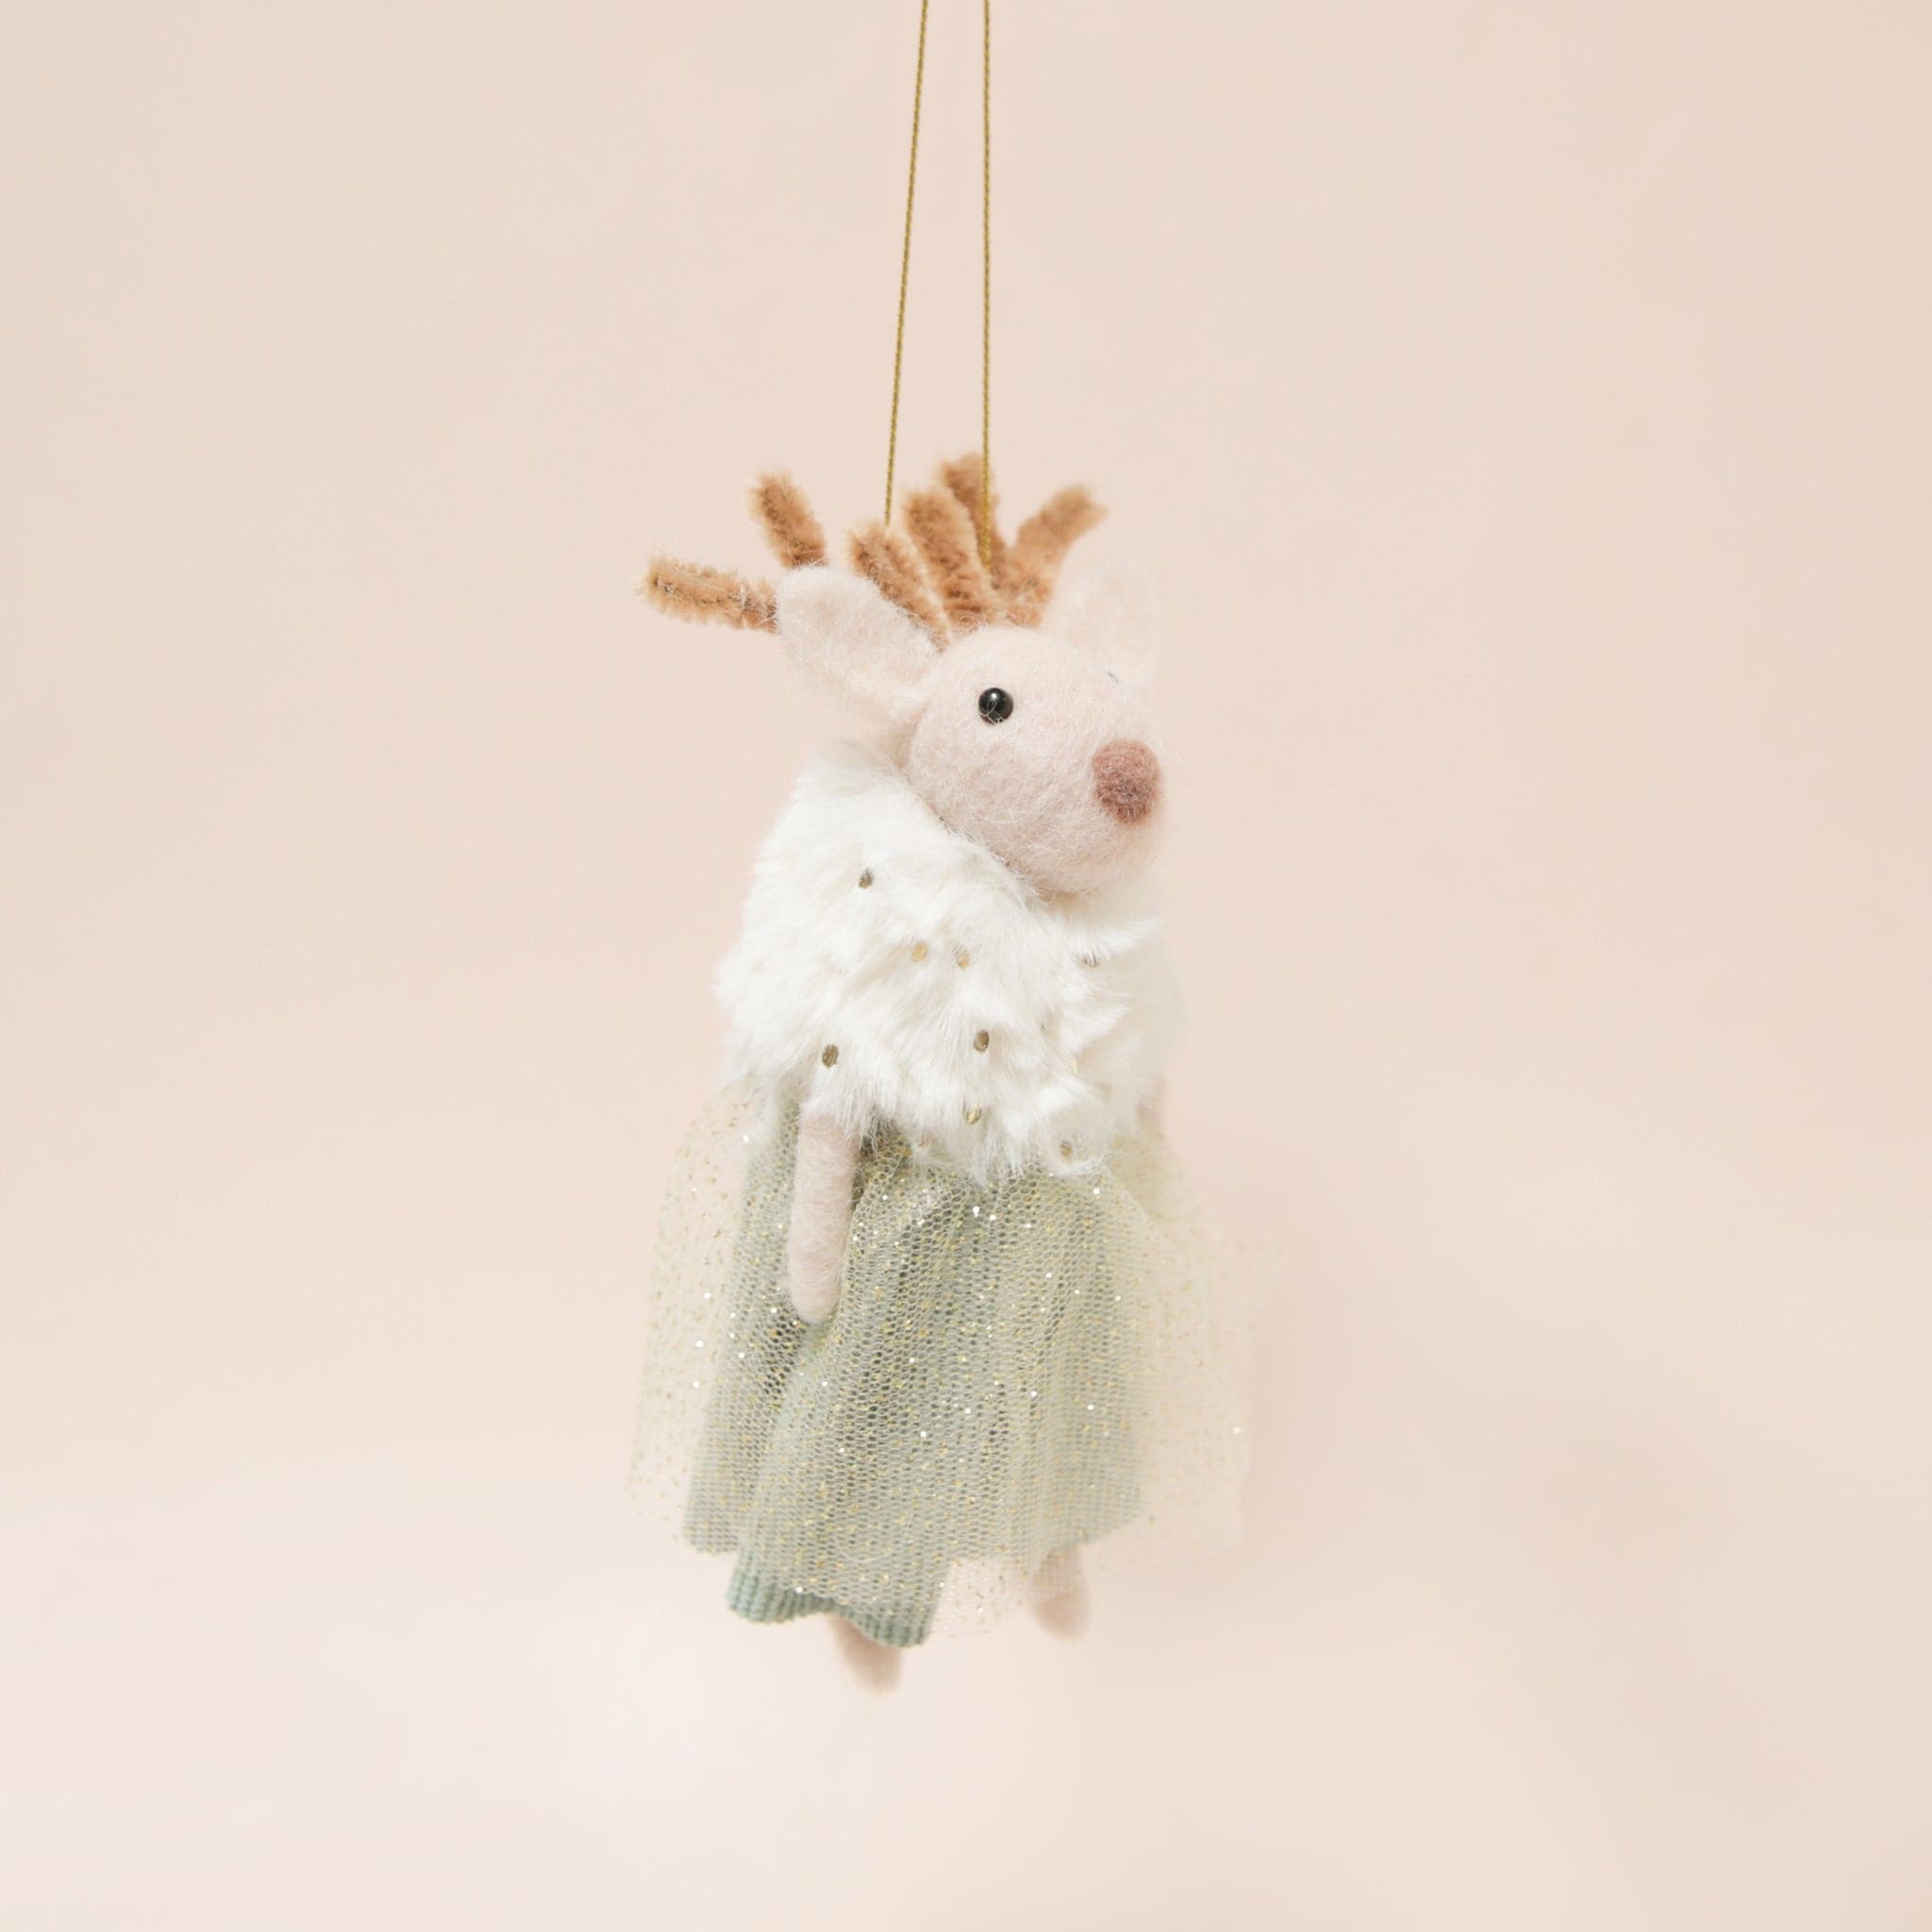 Against a peachy background is a felted deer ornament in a faux fur shall and a green tulle dress.